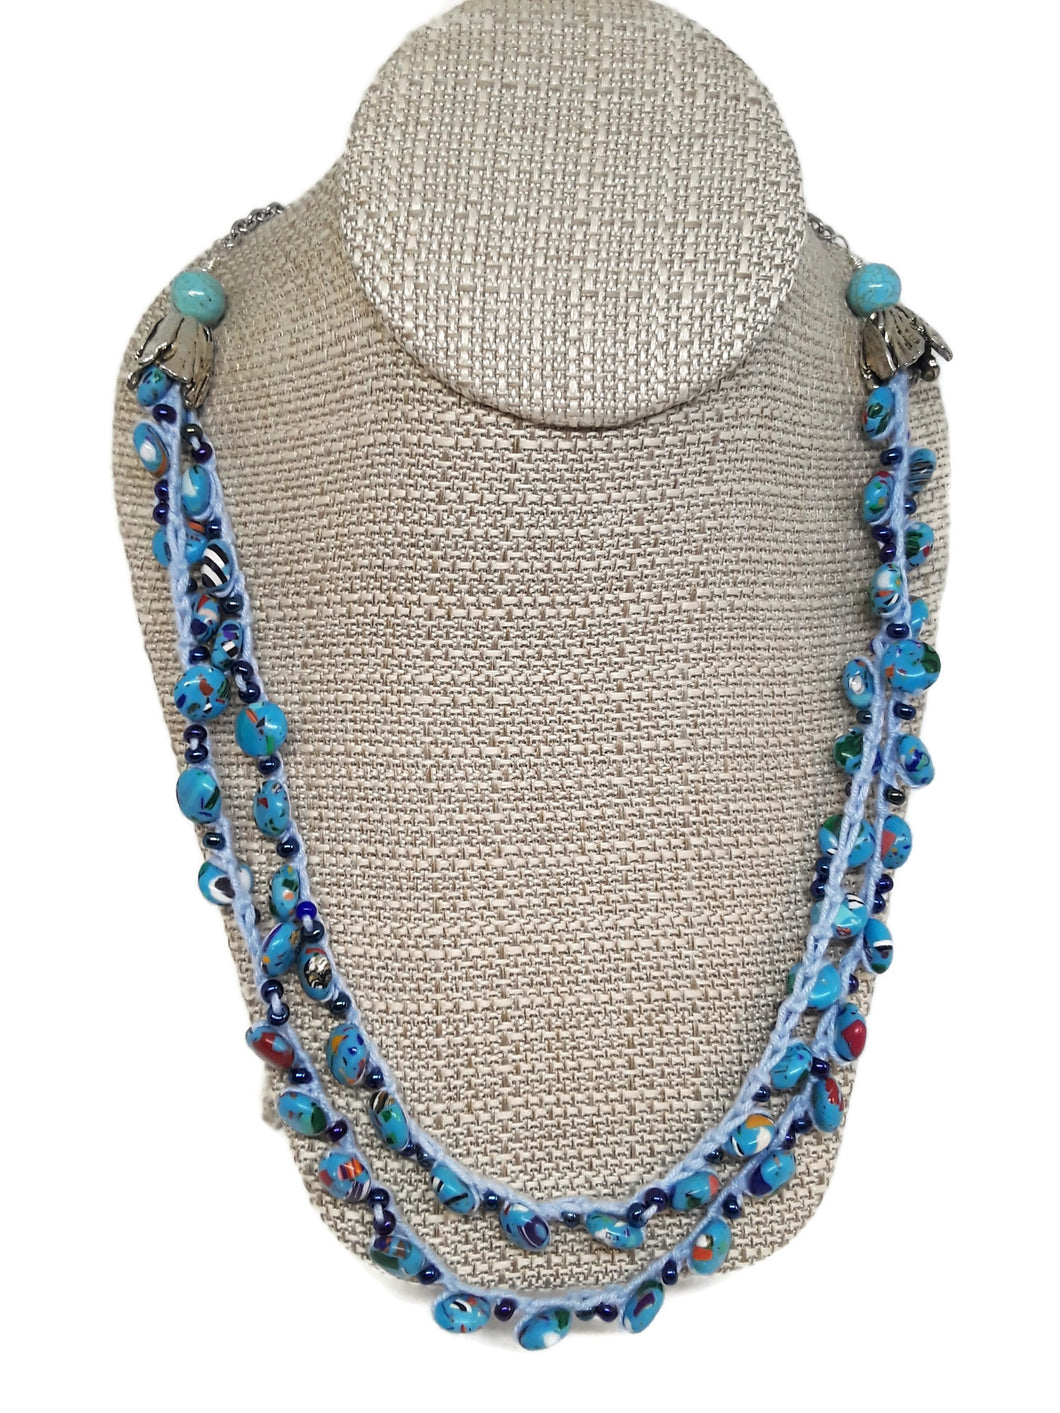 Mosaic Turquoise Bead Double Strand Crochet Necklace